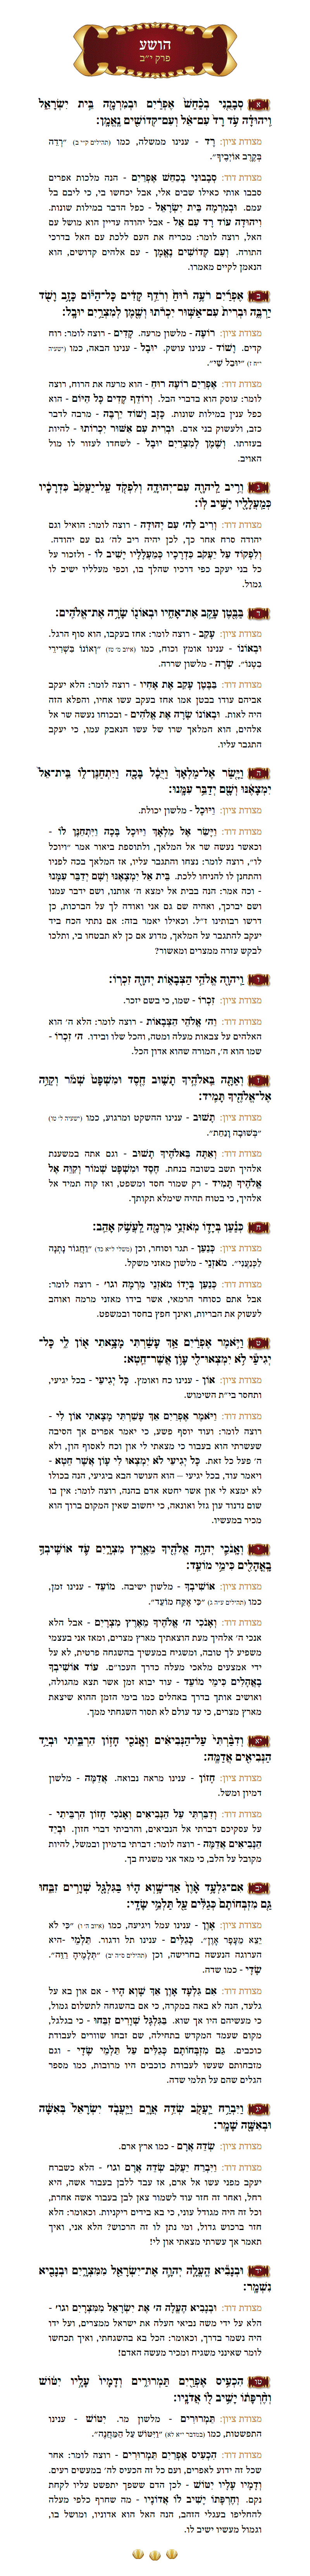 Sefer Hoshea Chapter 12 with commentary